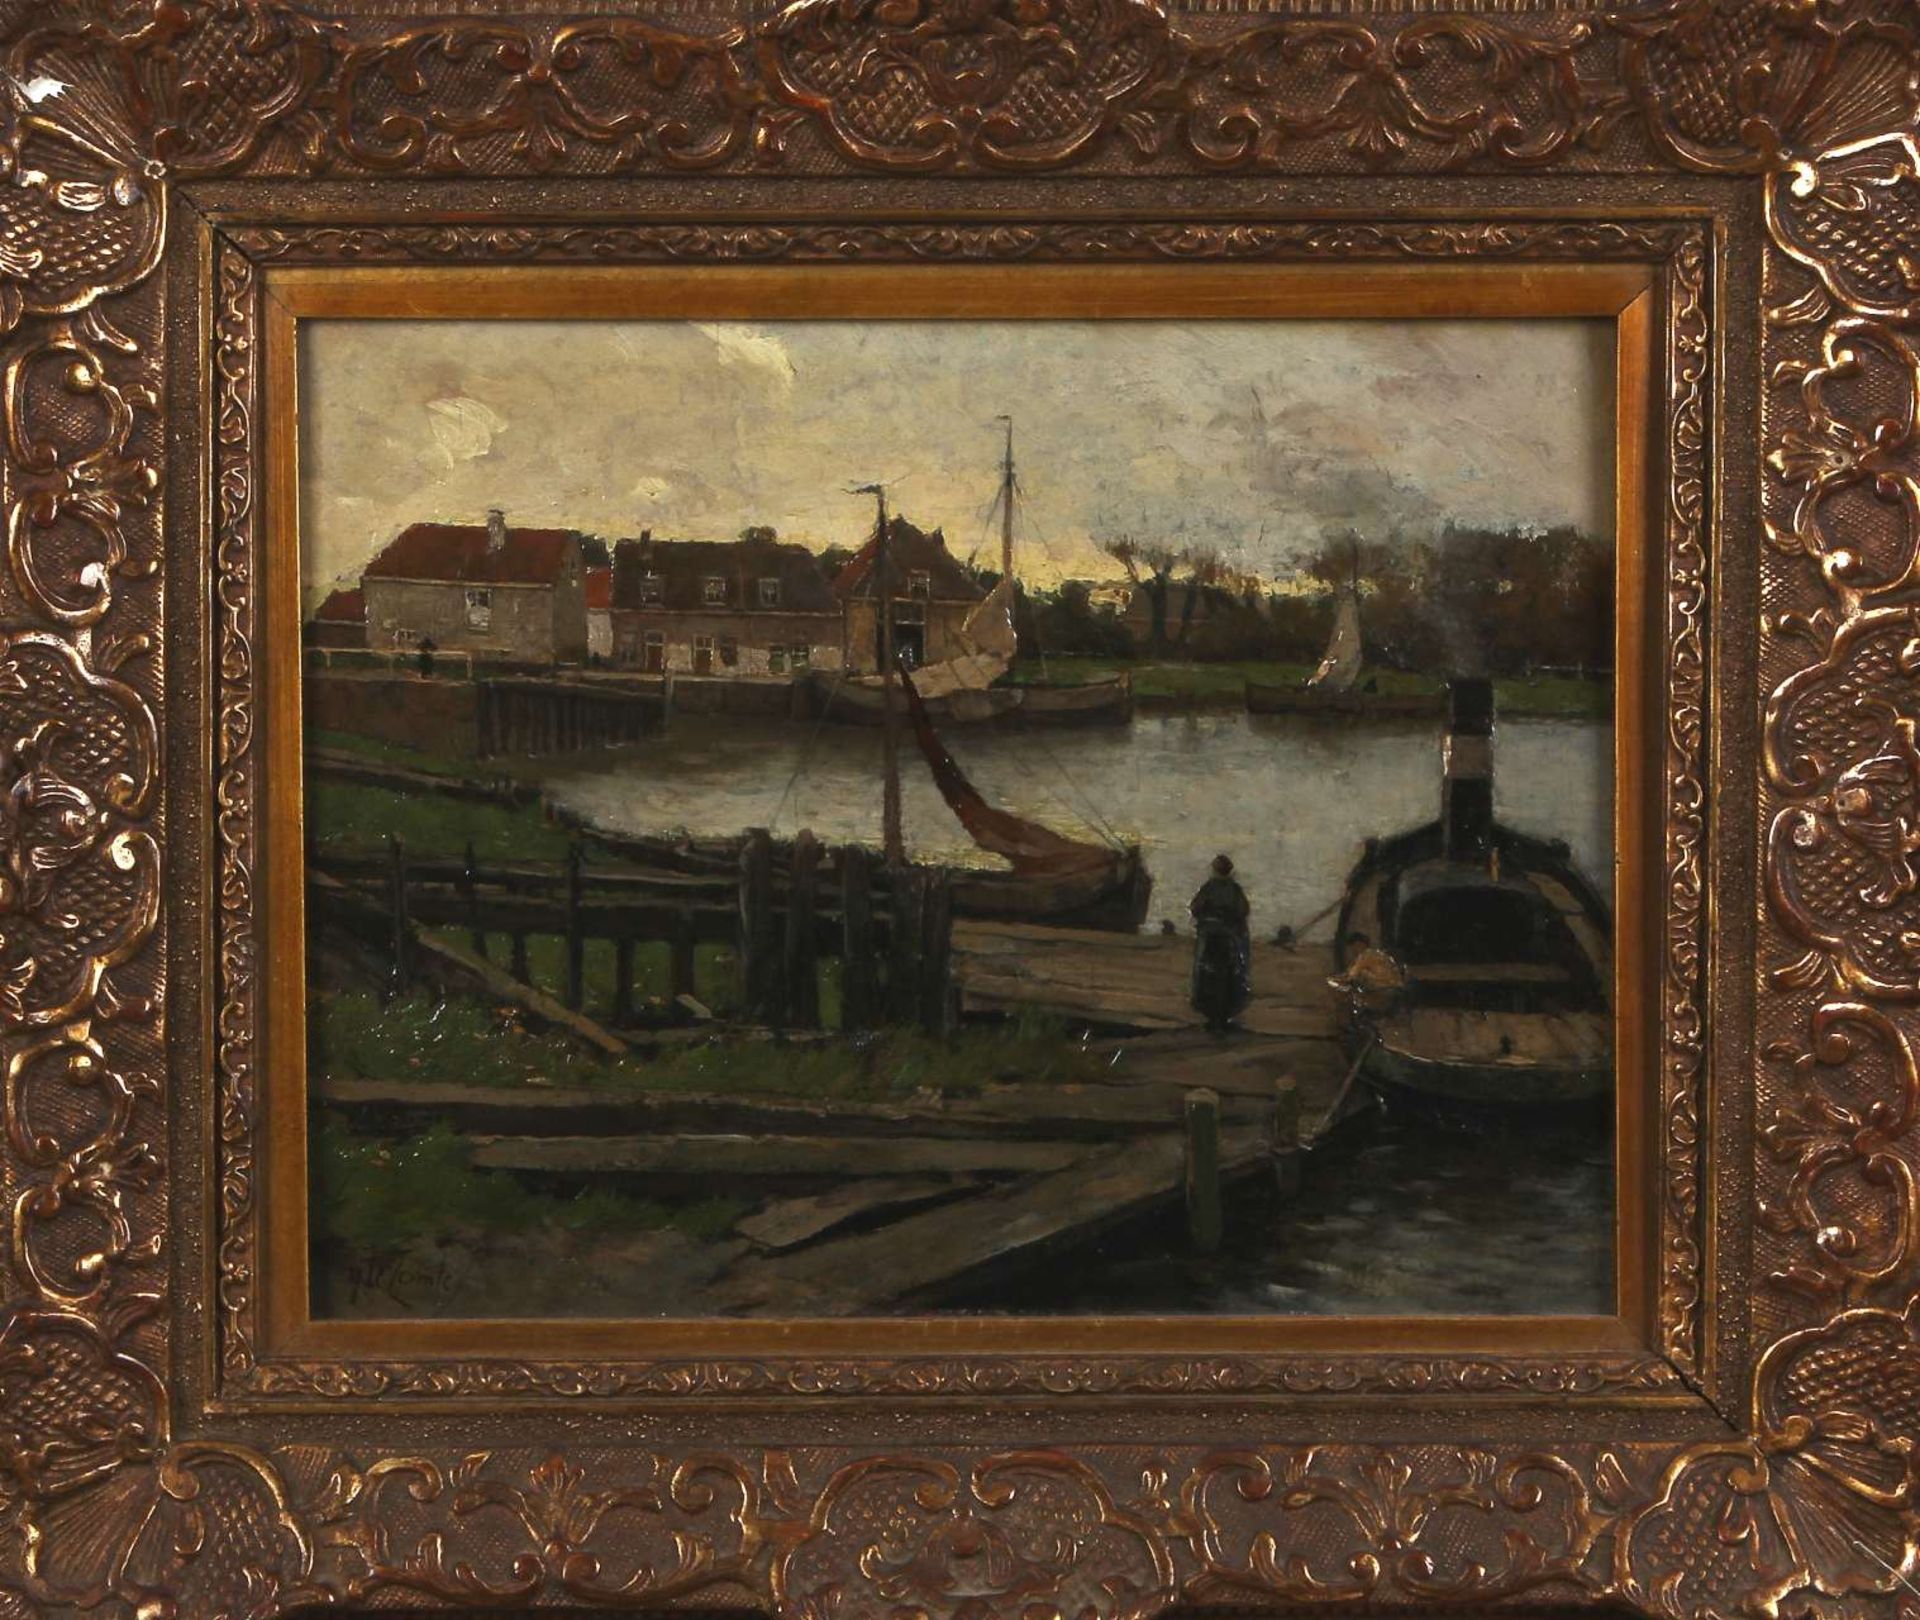 Adolf le Comte, 1850-1921 Belgian school, port face with steamer and figure, oil on canvas, 29x23cm.